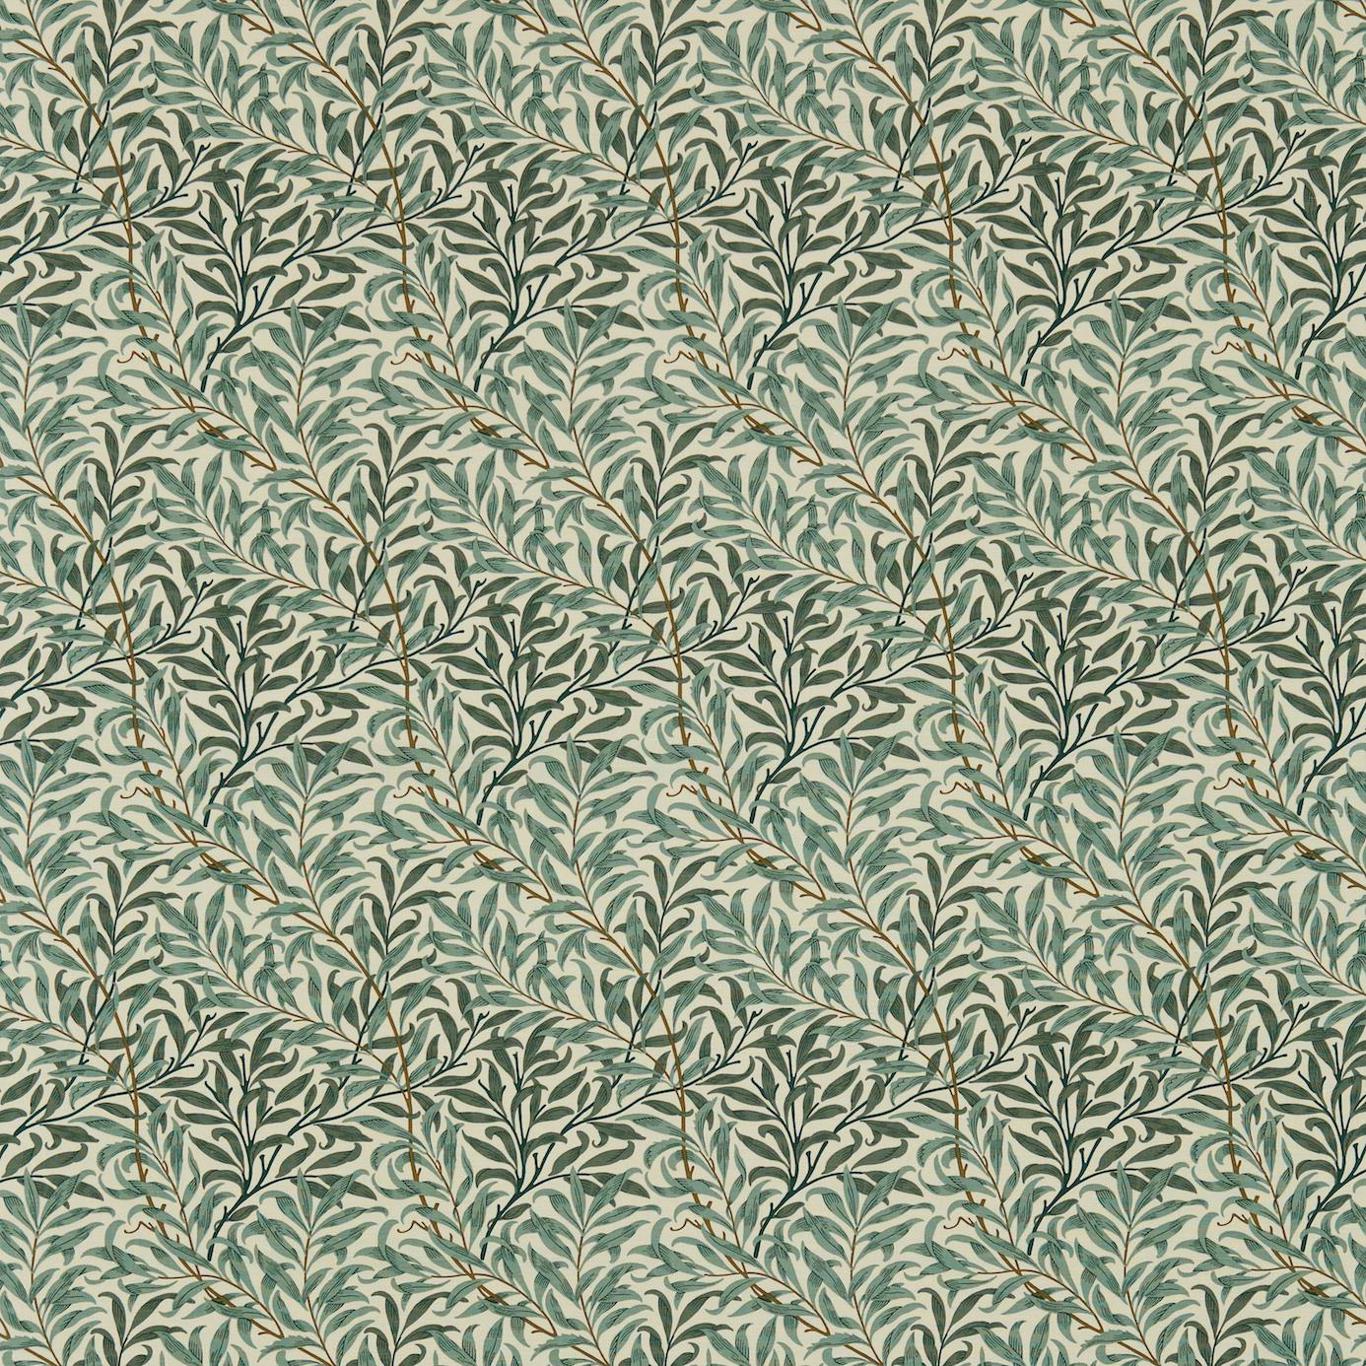 Willow Boughs Cream/Green Fabric by MOR